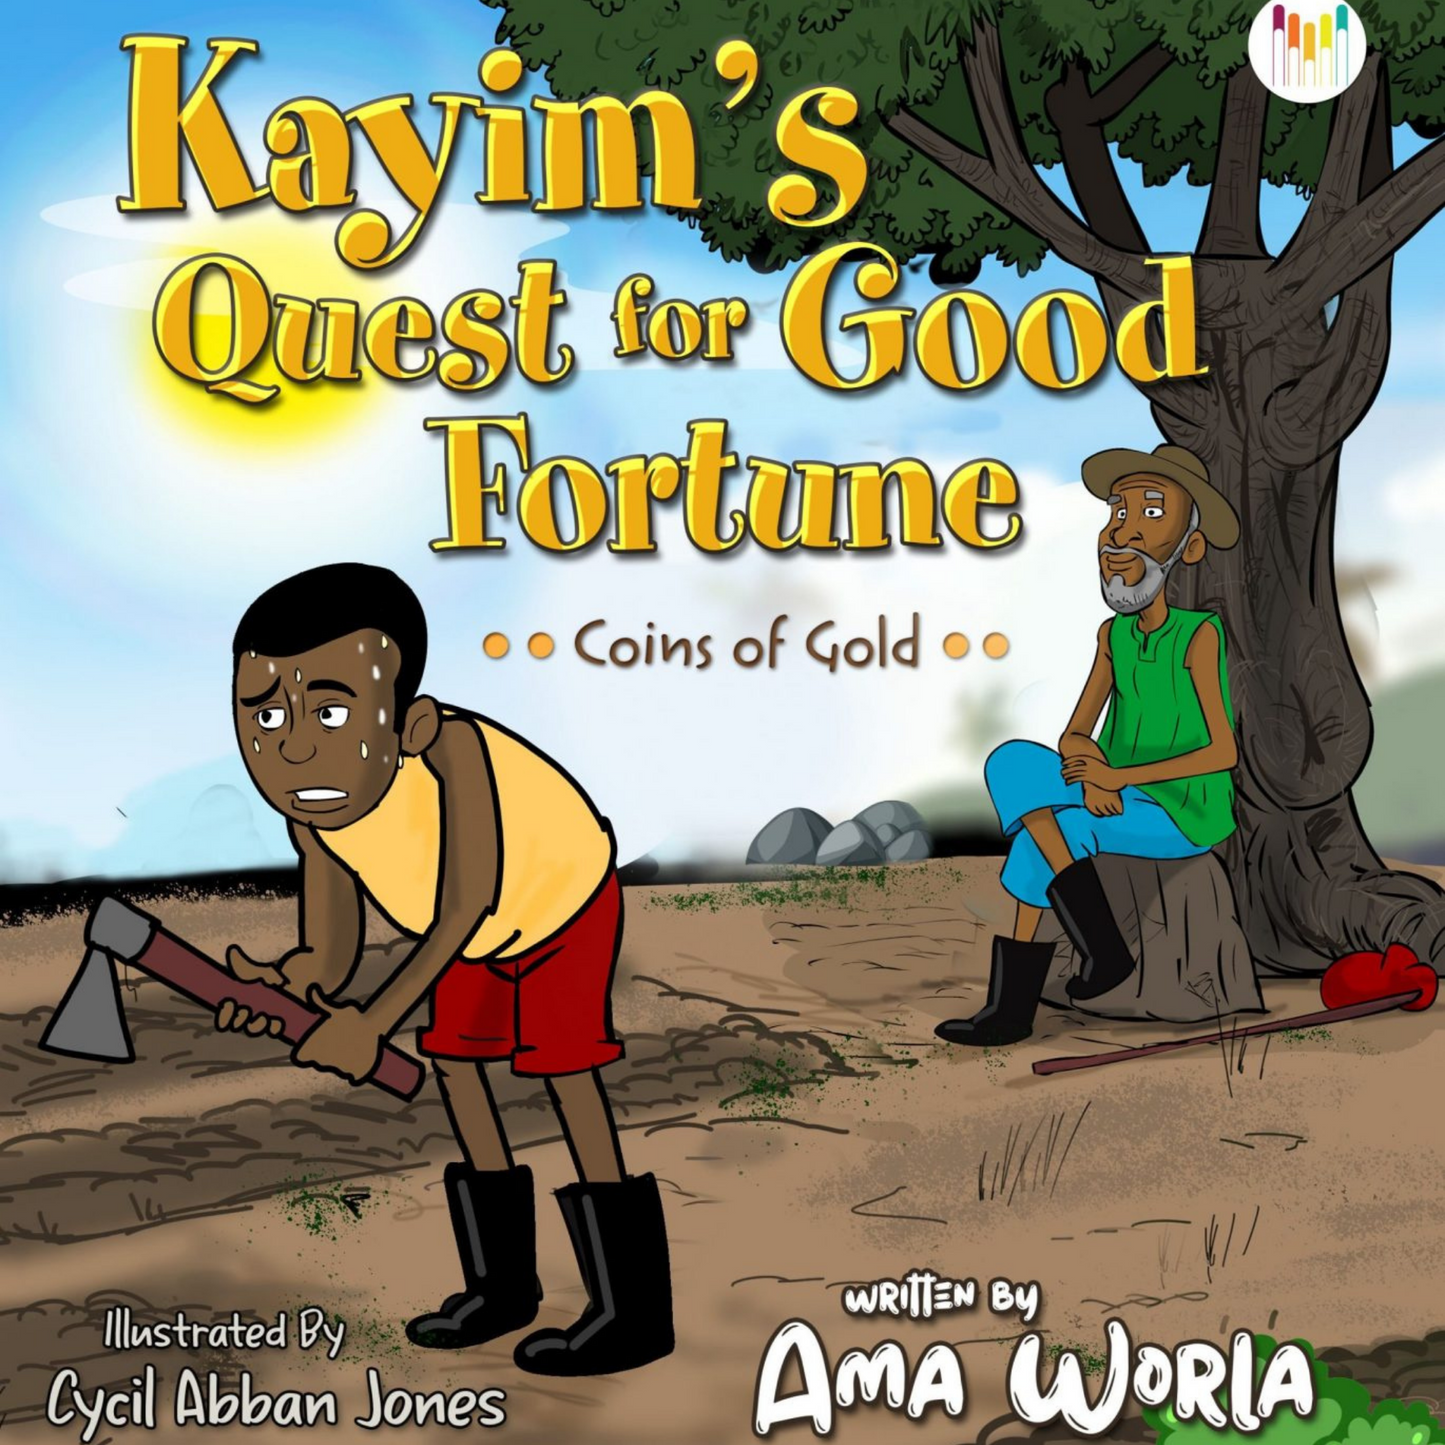 Kayim's Quest for Good Fortune